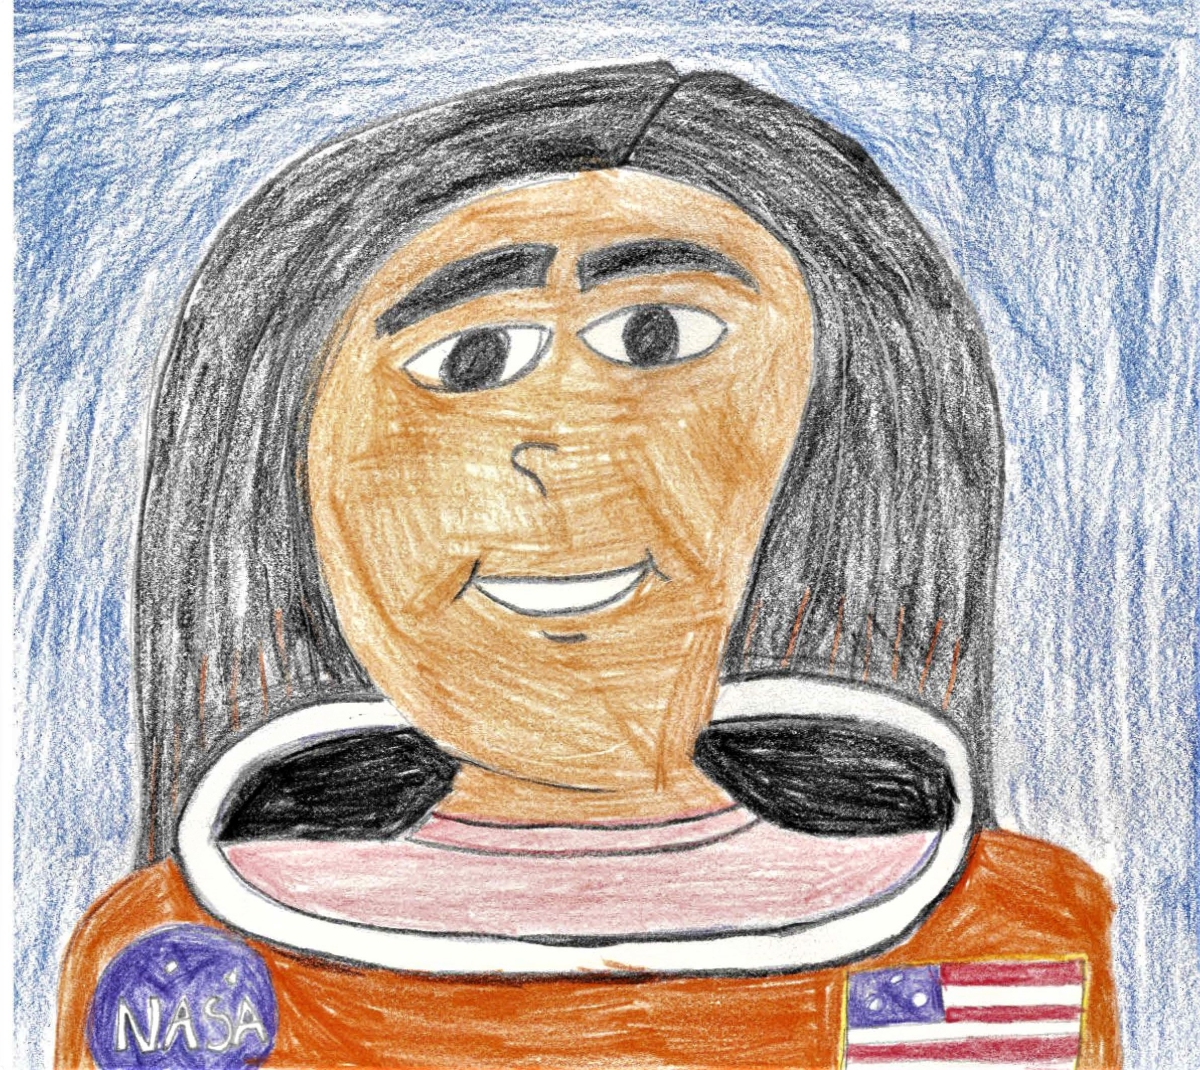 Kalpana Chawla Biography For Students And Children - Kids Portal For Parents